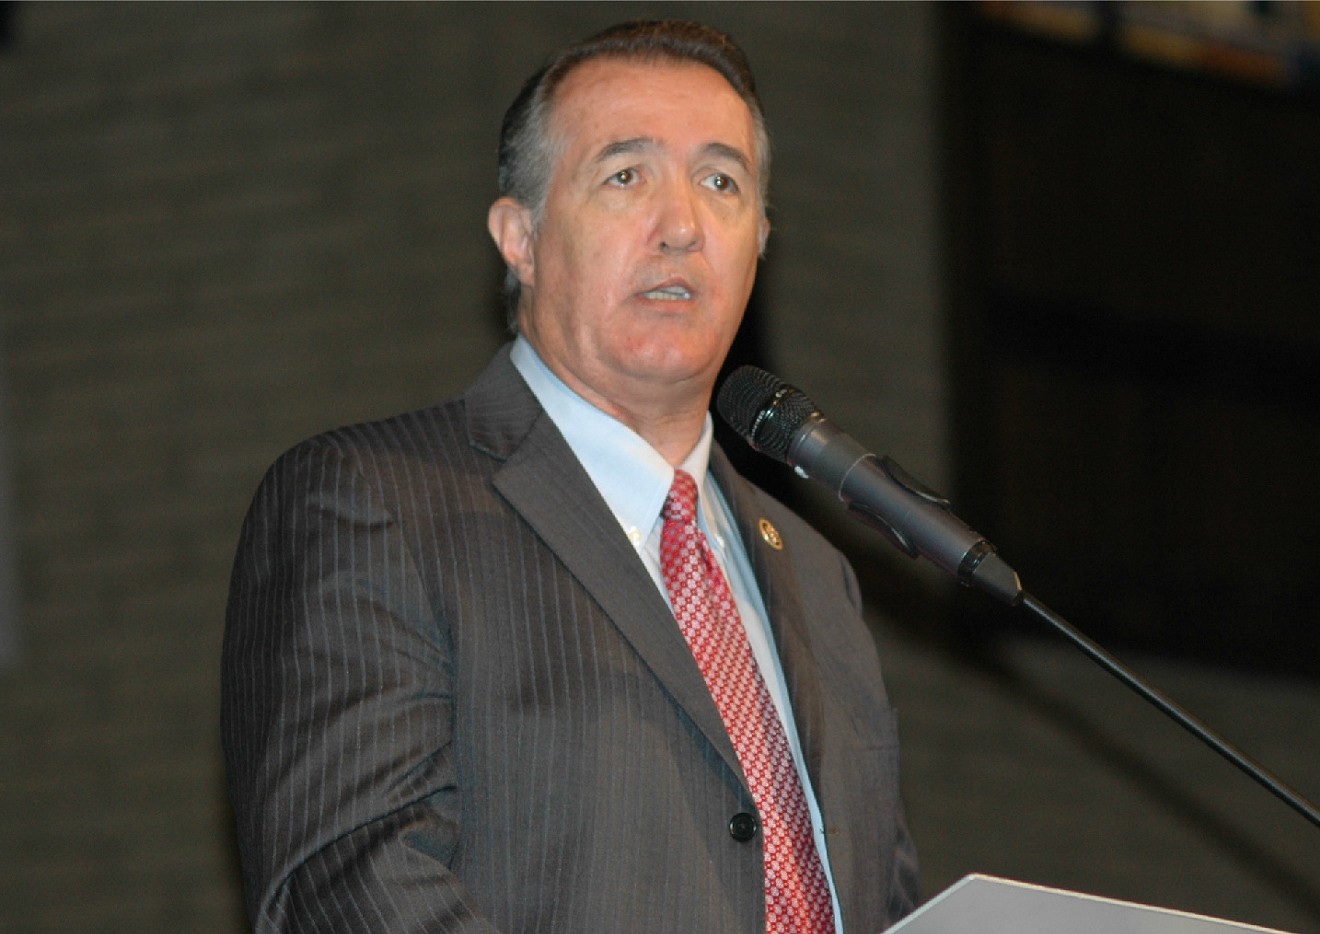 Rep. Trent Franks, a Republican from Arizona, proposed that the Pentagon identify and assess Islamic doctrine and leaders associated with terrorism.